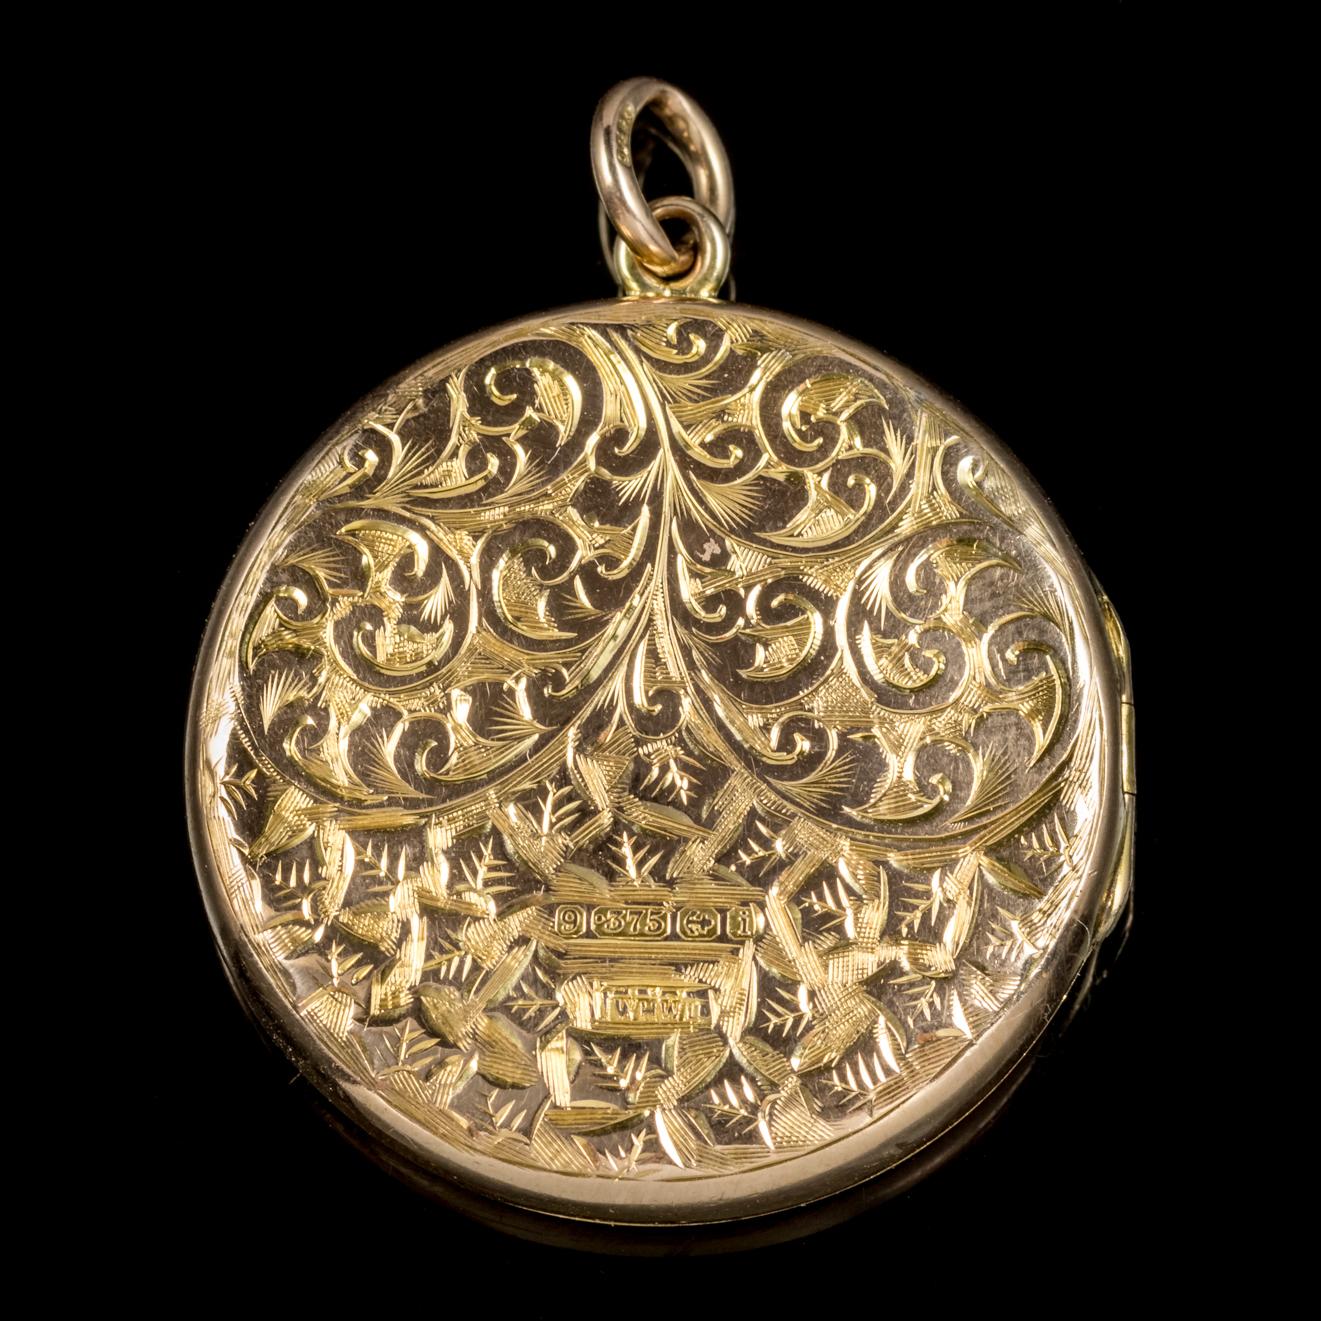 This gorgeous antique Edwardian round 9ct Gold heart locket is dated Birmingham 1908.

The lovely piece is beautifully engraved on the back and front with a pretty Golden heart in the centre.

The locket opens and closes securely with a purple